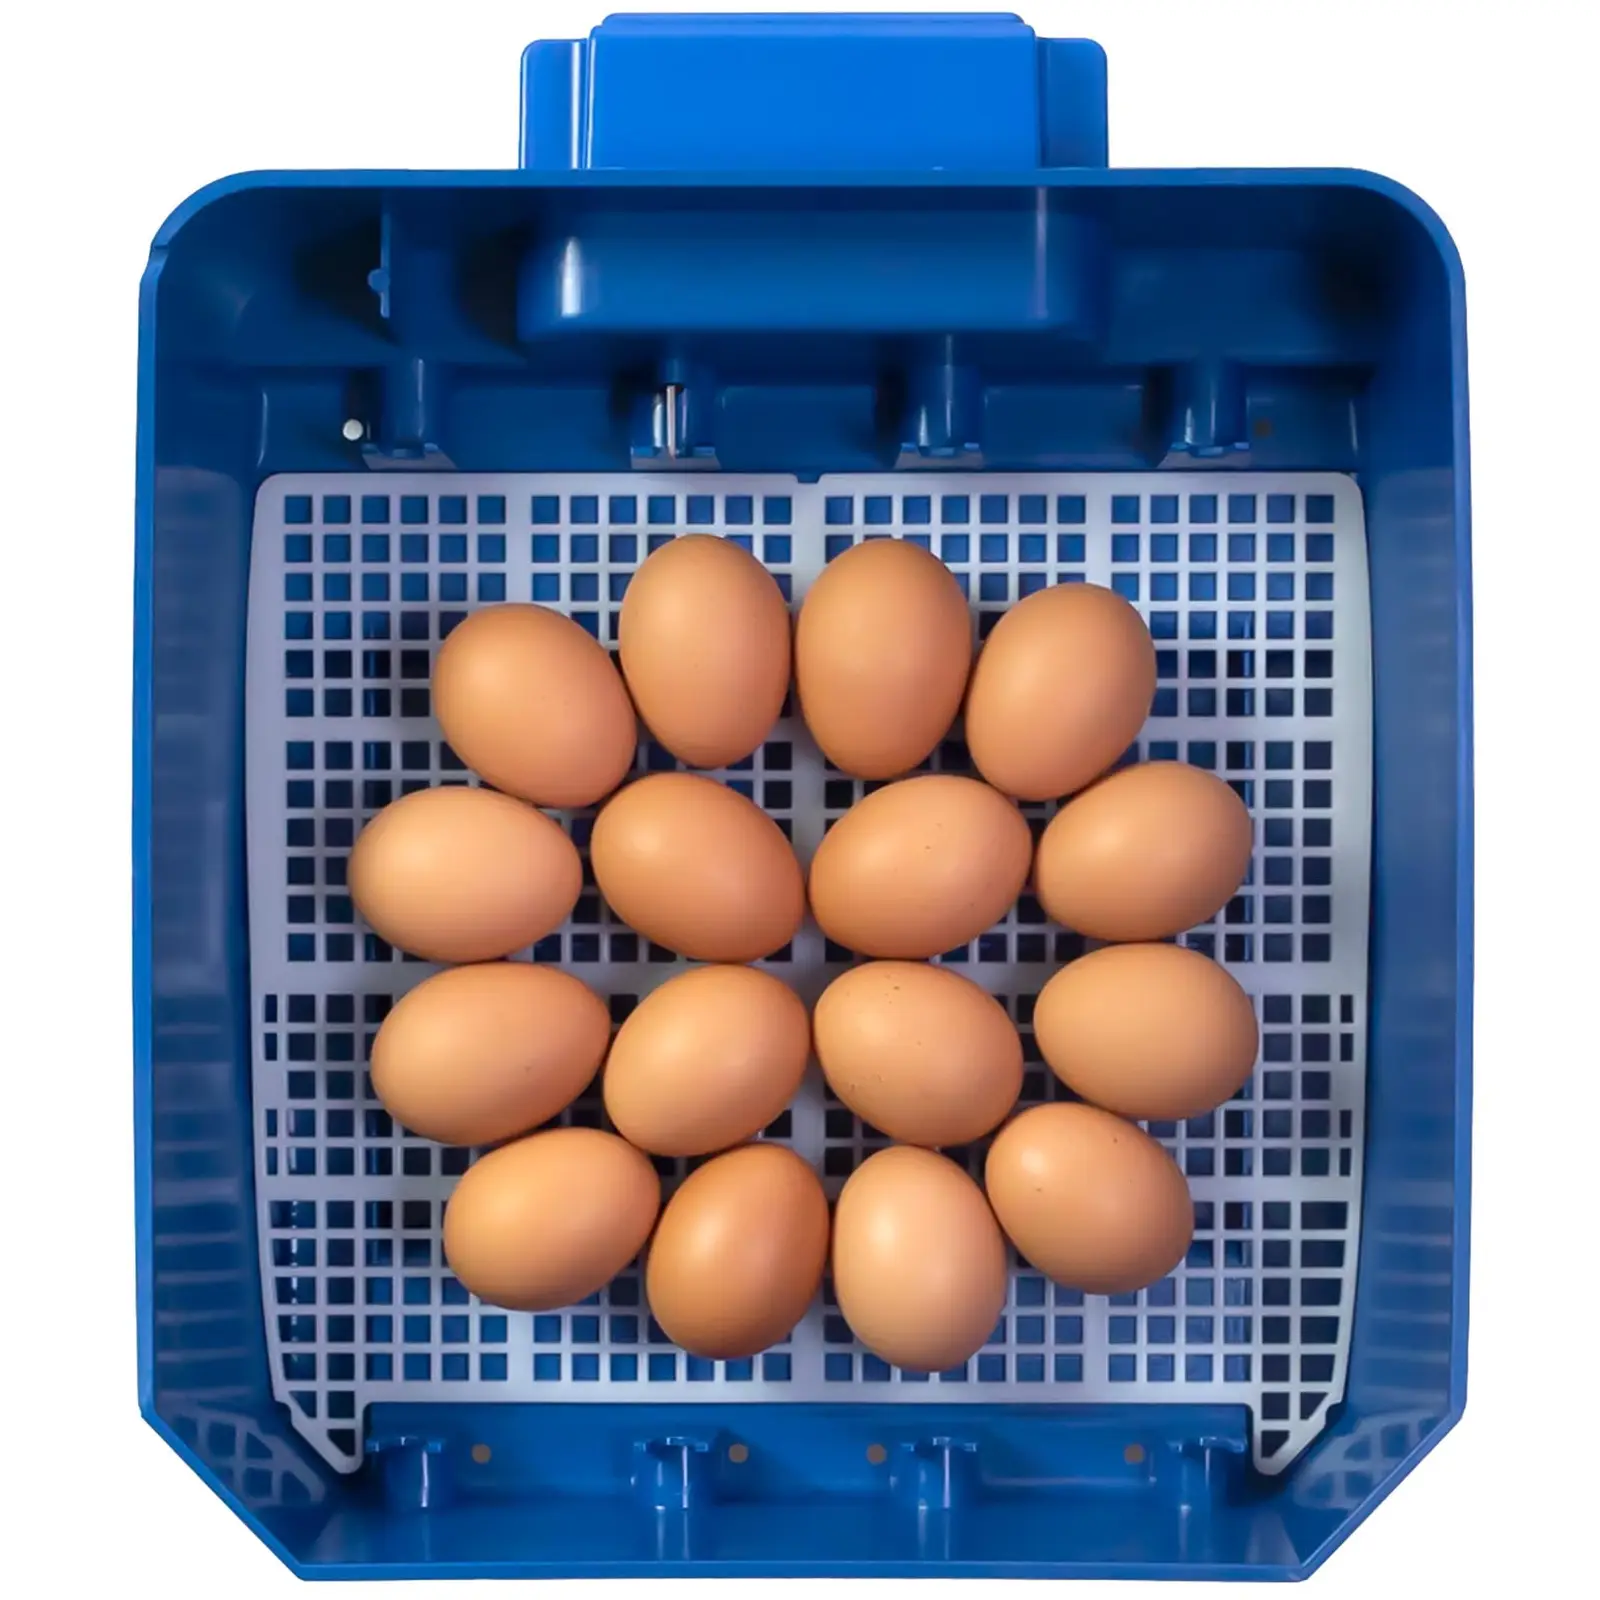 Incubator - 16 eggs - irrigation system included - fully automatic - antimicrobial Biomaster protection